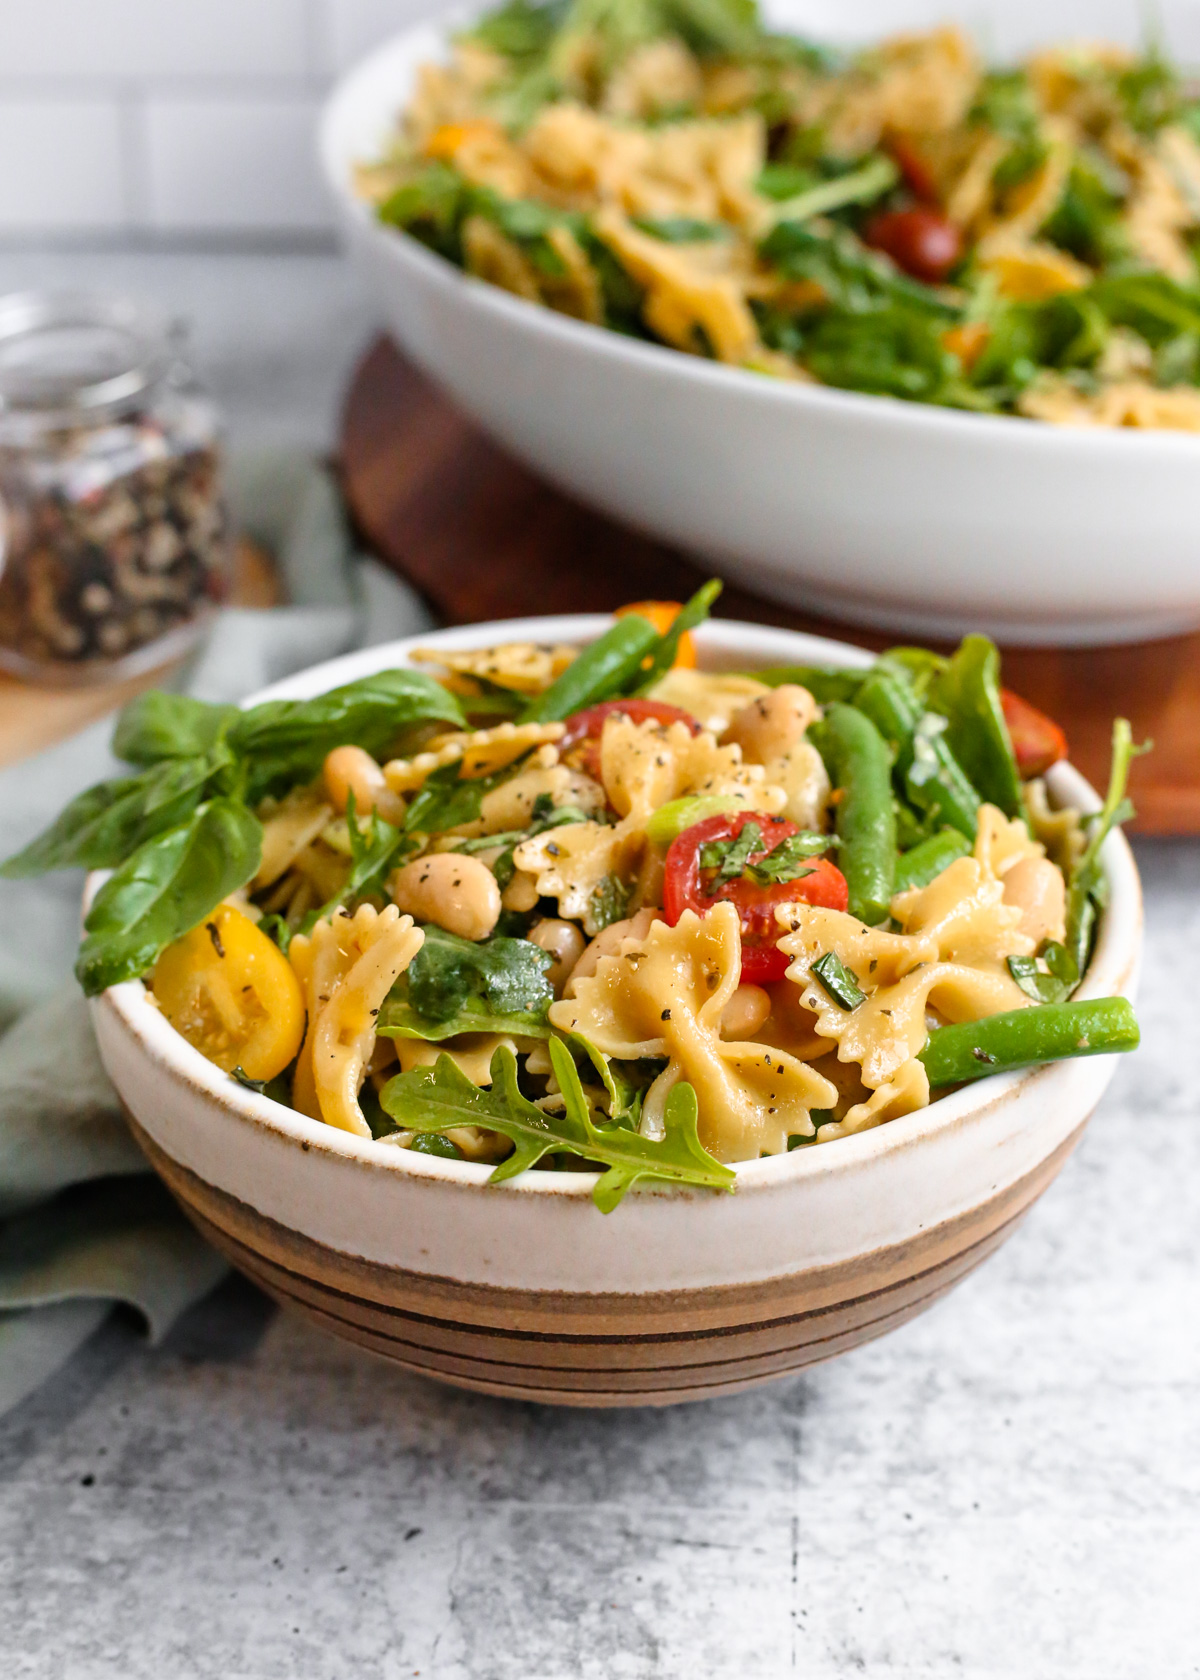 Angled view of a bowl of beans and greens pasta salad, using bowtie pasta, cherry tomatoes, green beans, white beans, sliced green onions, and a light vinaigrette dressing. Behind the bowl is a larger serving bowl on a wooden platter